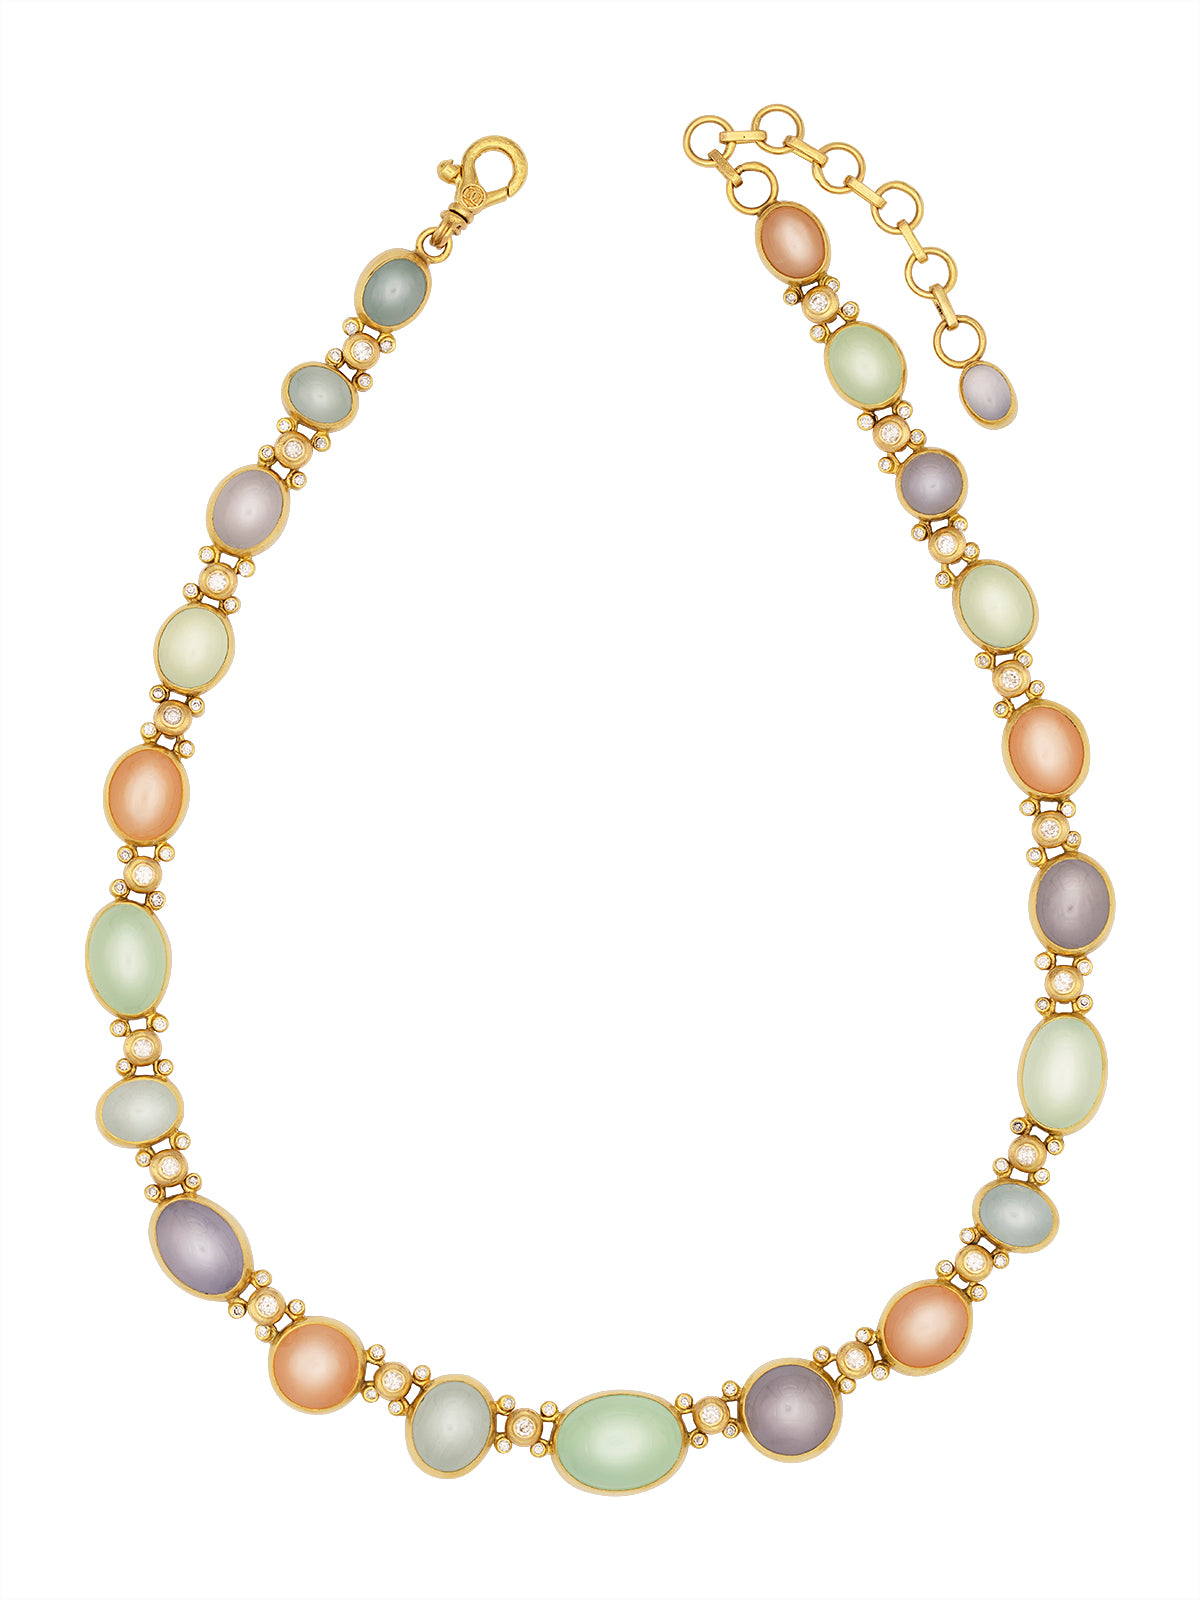 GURHAN, GURHAN Rune Gold All Around Short Necklace, Mixed Round and Oval Cabochon, with Mixed Pastel Stones